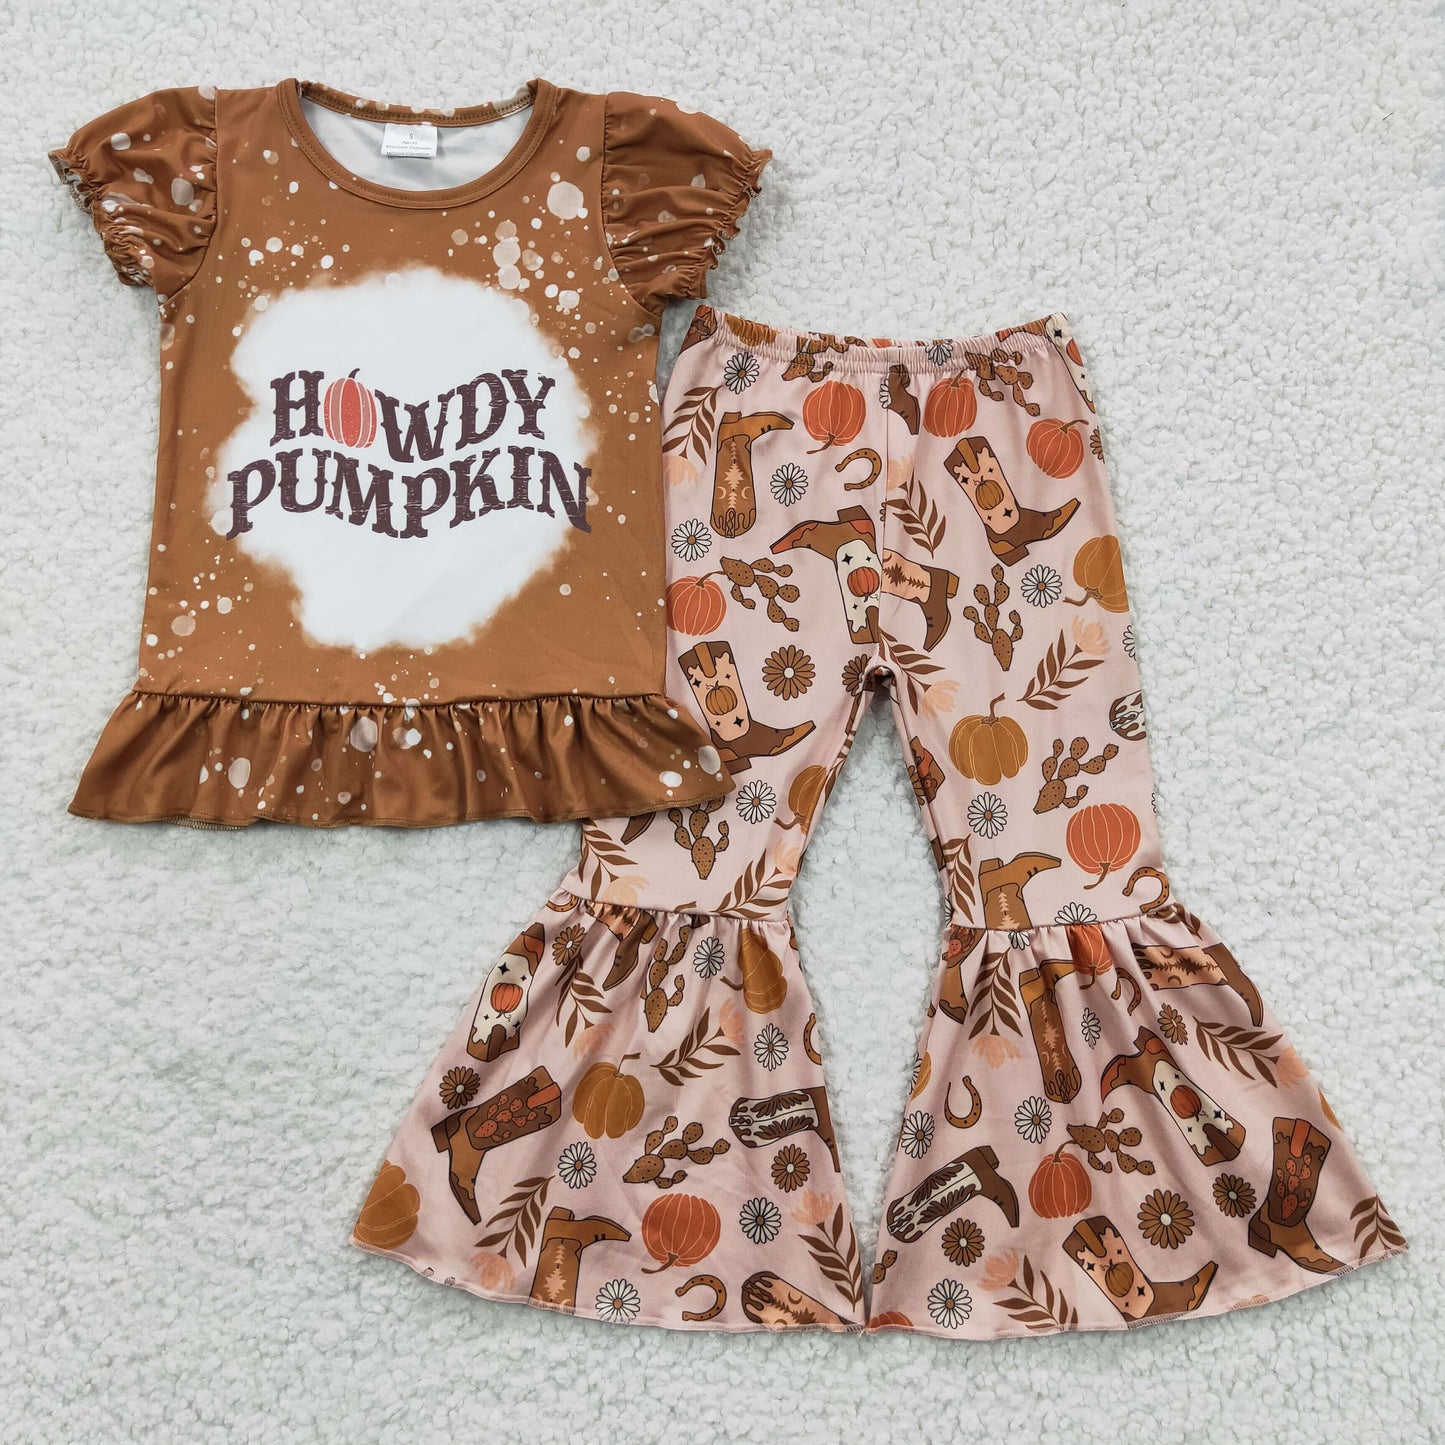 GSPO0611 Western Howdy Baby Girl Pumpkin Shirt Boots Bell Pants Fall Outfit